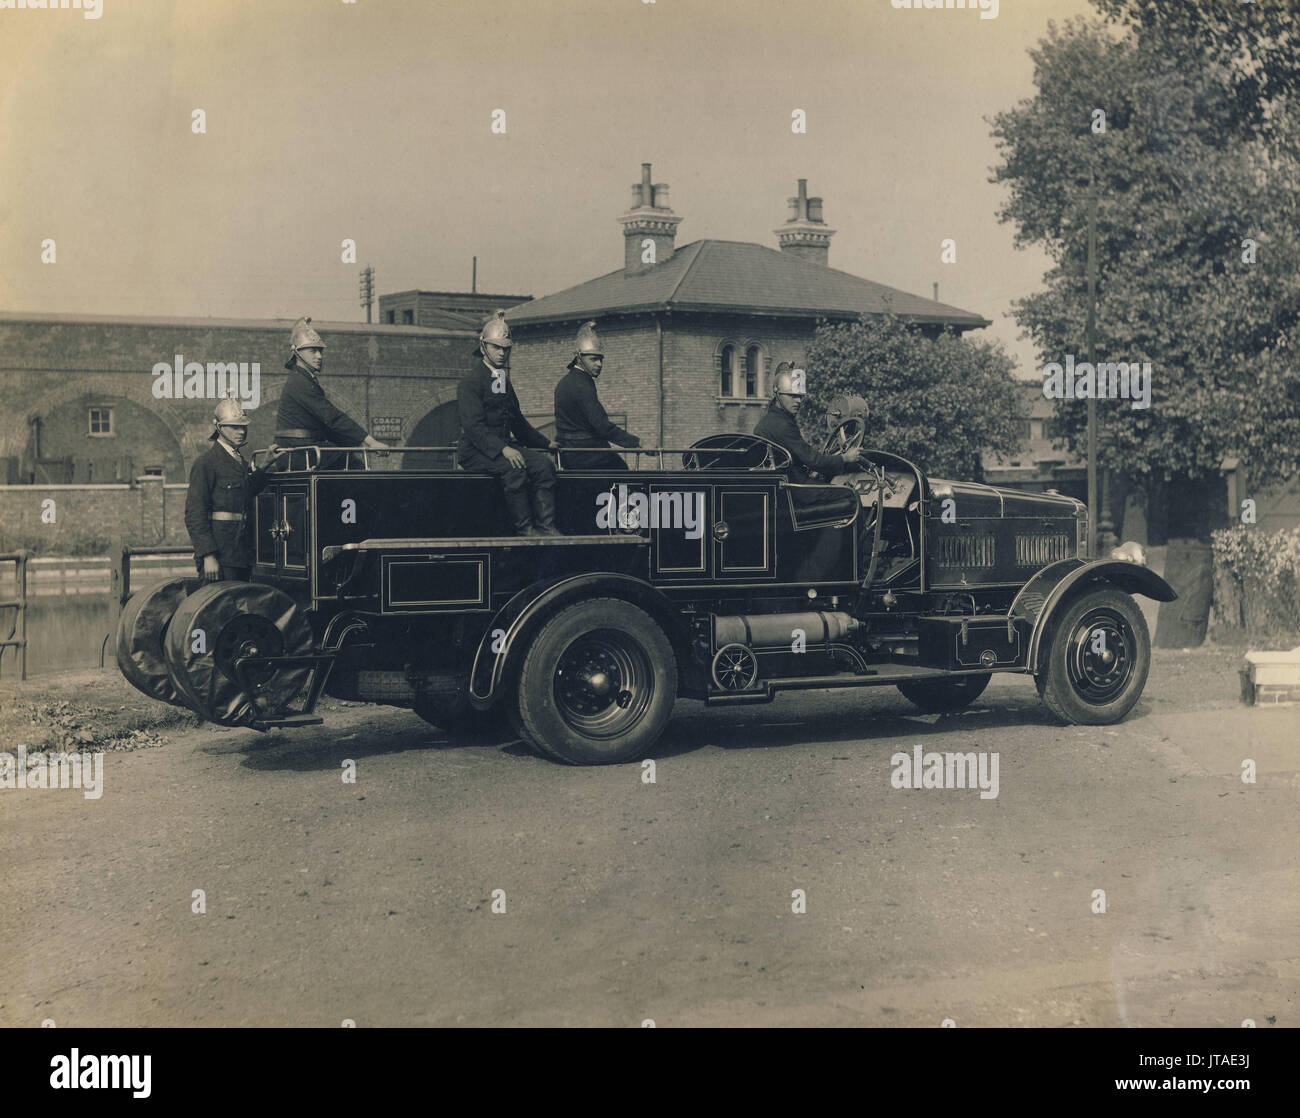 Firemen with fire engine, Fire brigade, c1930s, historic archive photograph Stock Photo